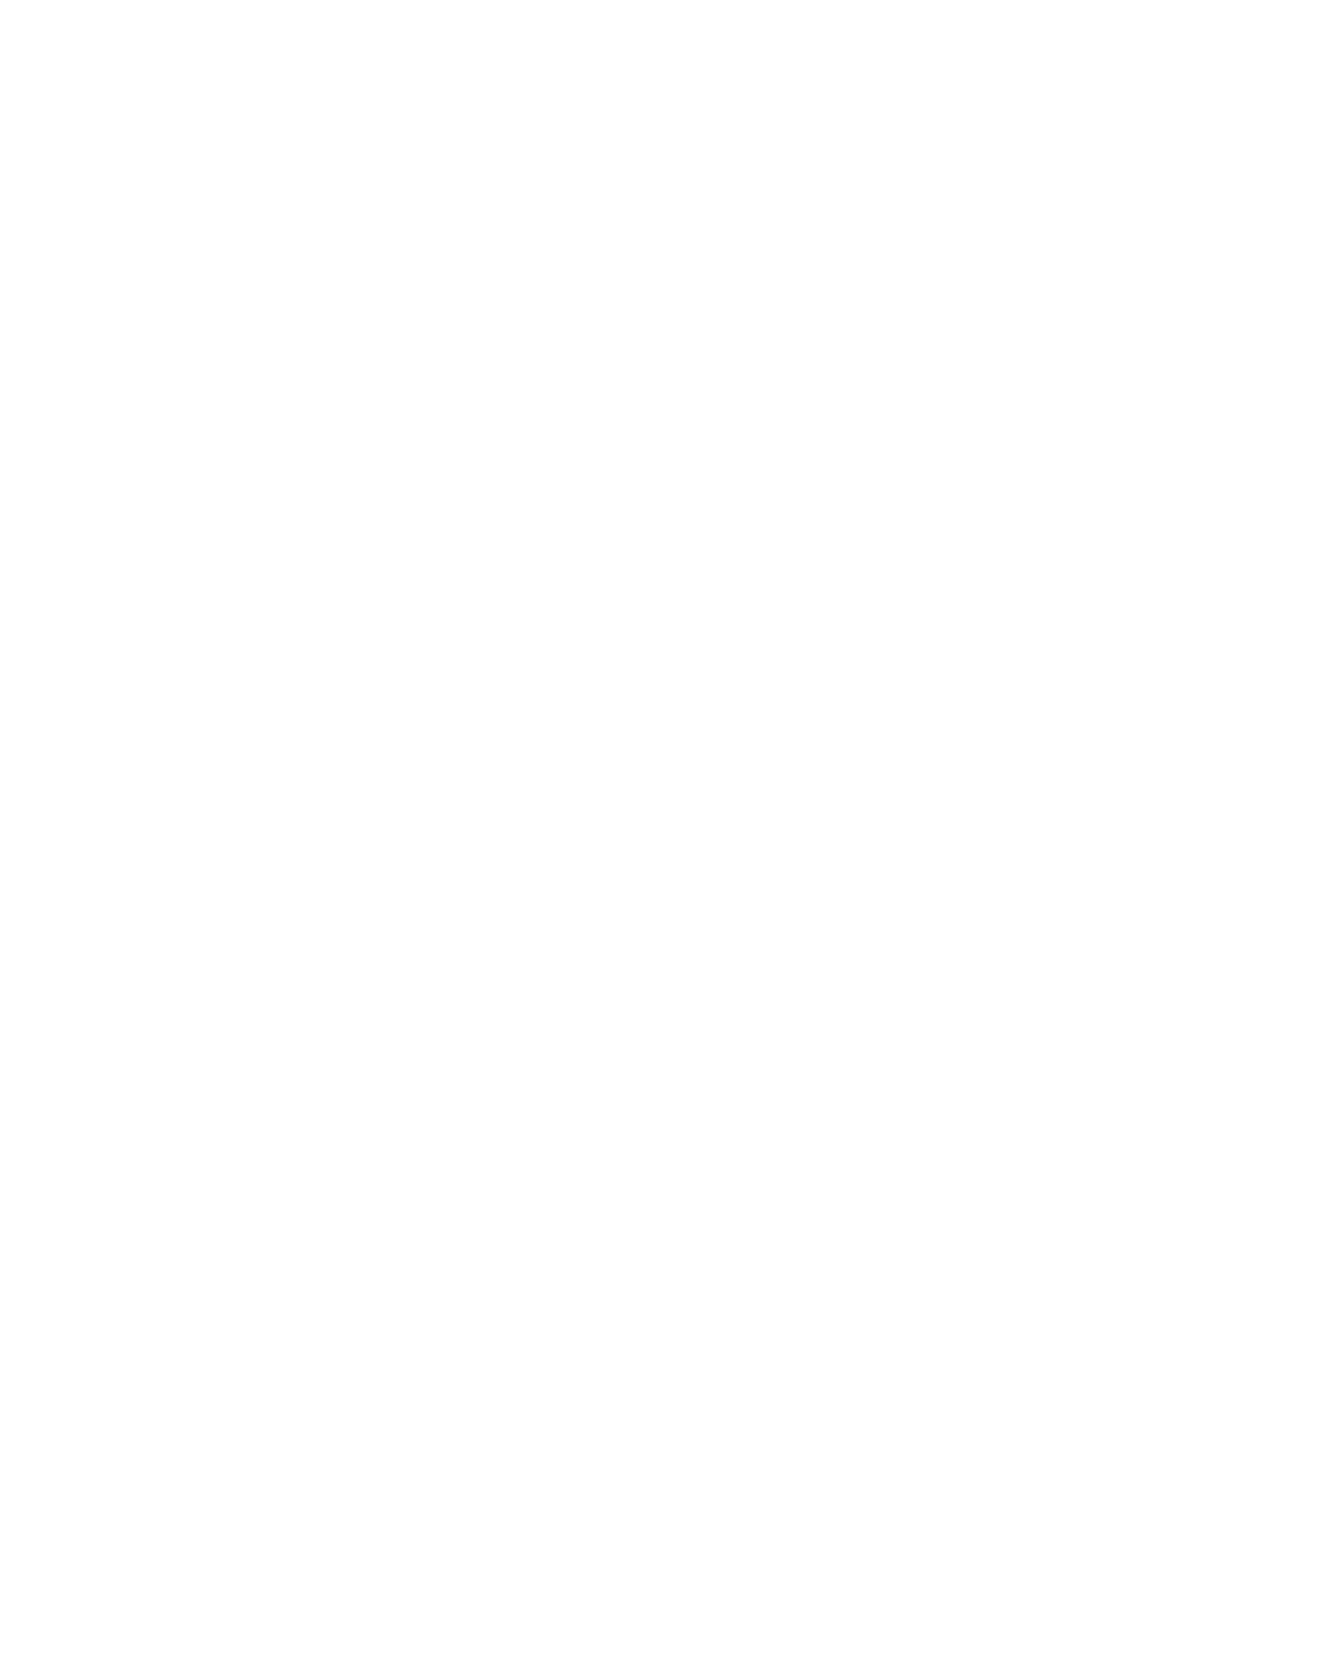 Indian Railway Catering & Tourism logo large for dark backgrounds (transparent PNG)